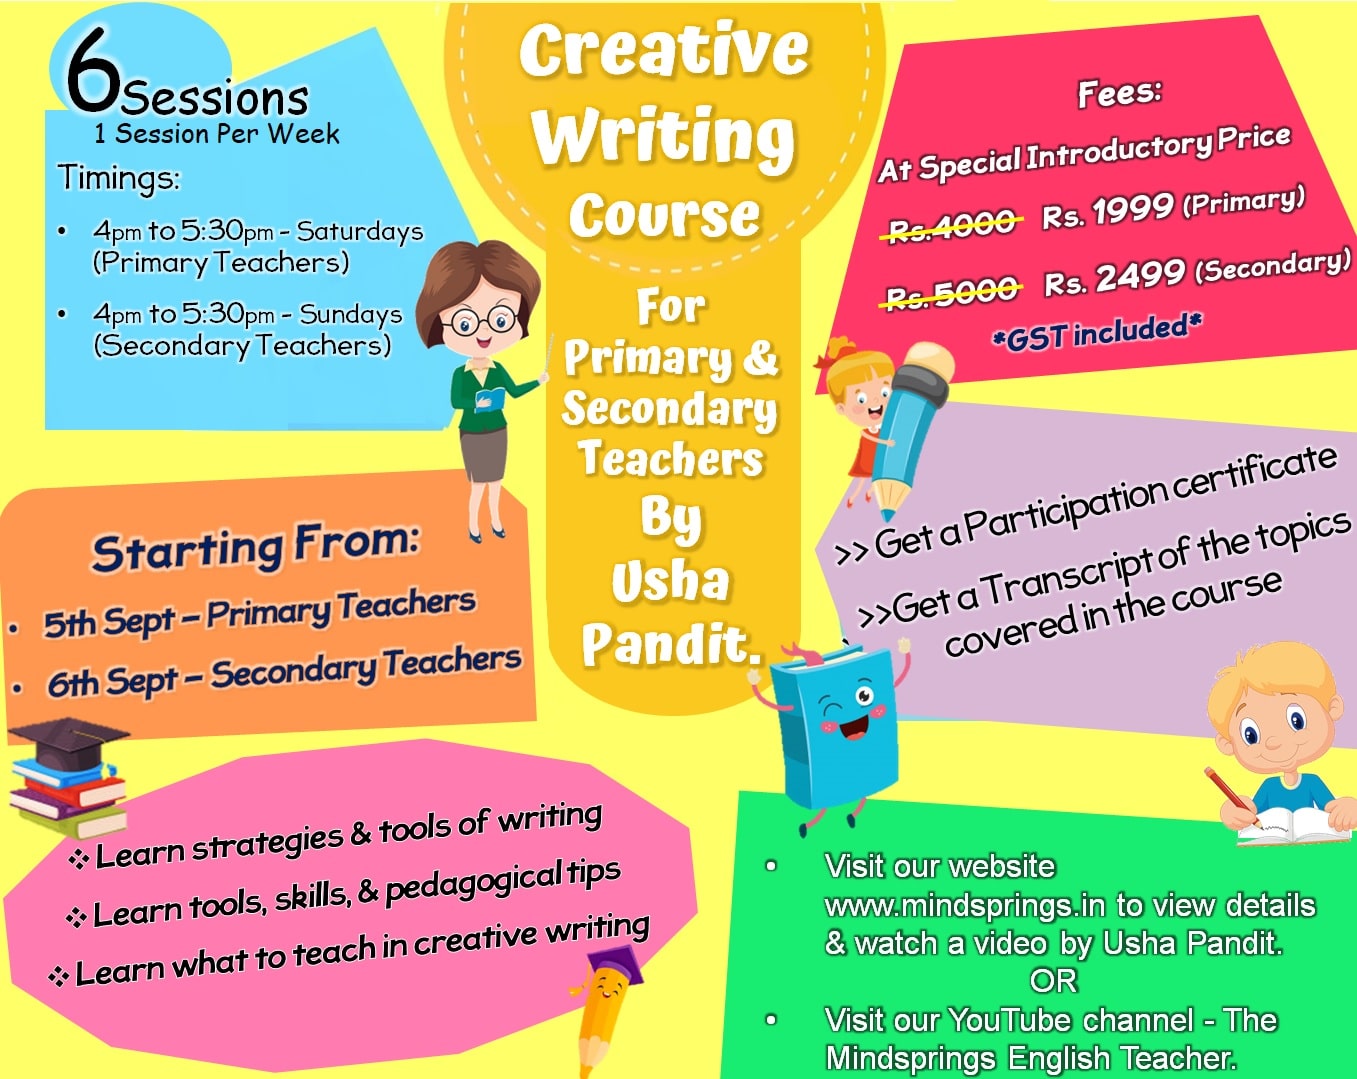 Creative writing coursefor Primary and Secondary Teachers